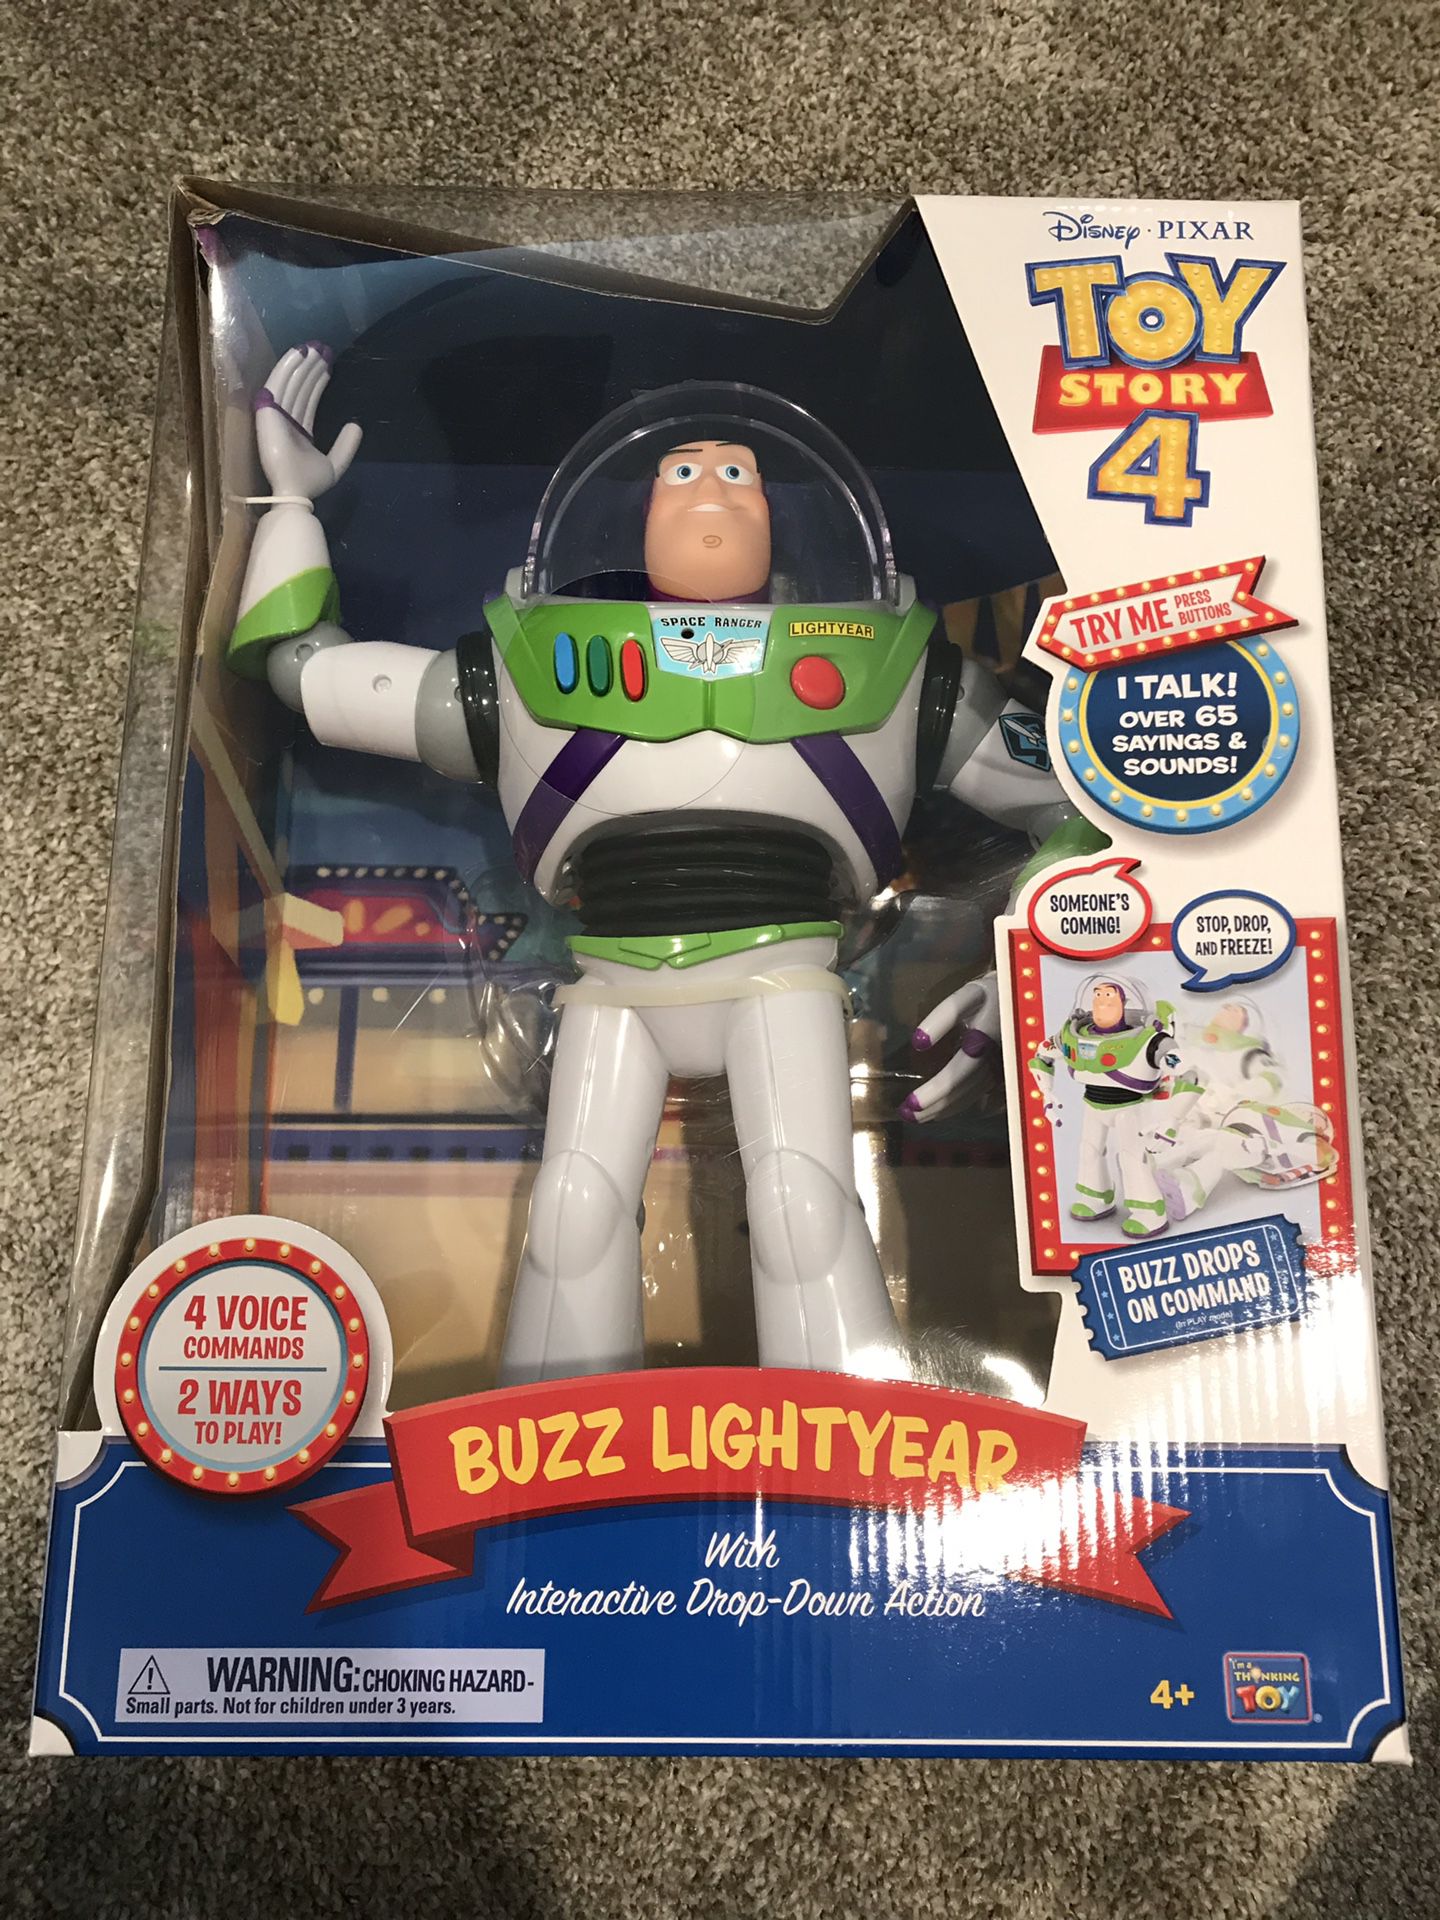 Buzz Lightyear w/interactive drop-down action